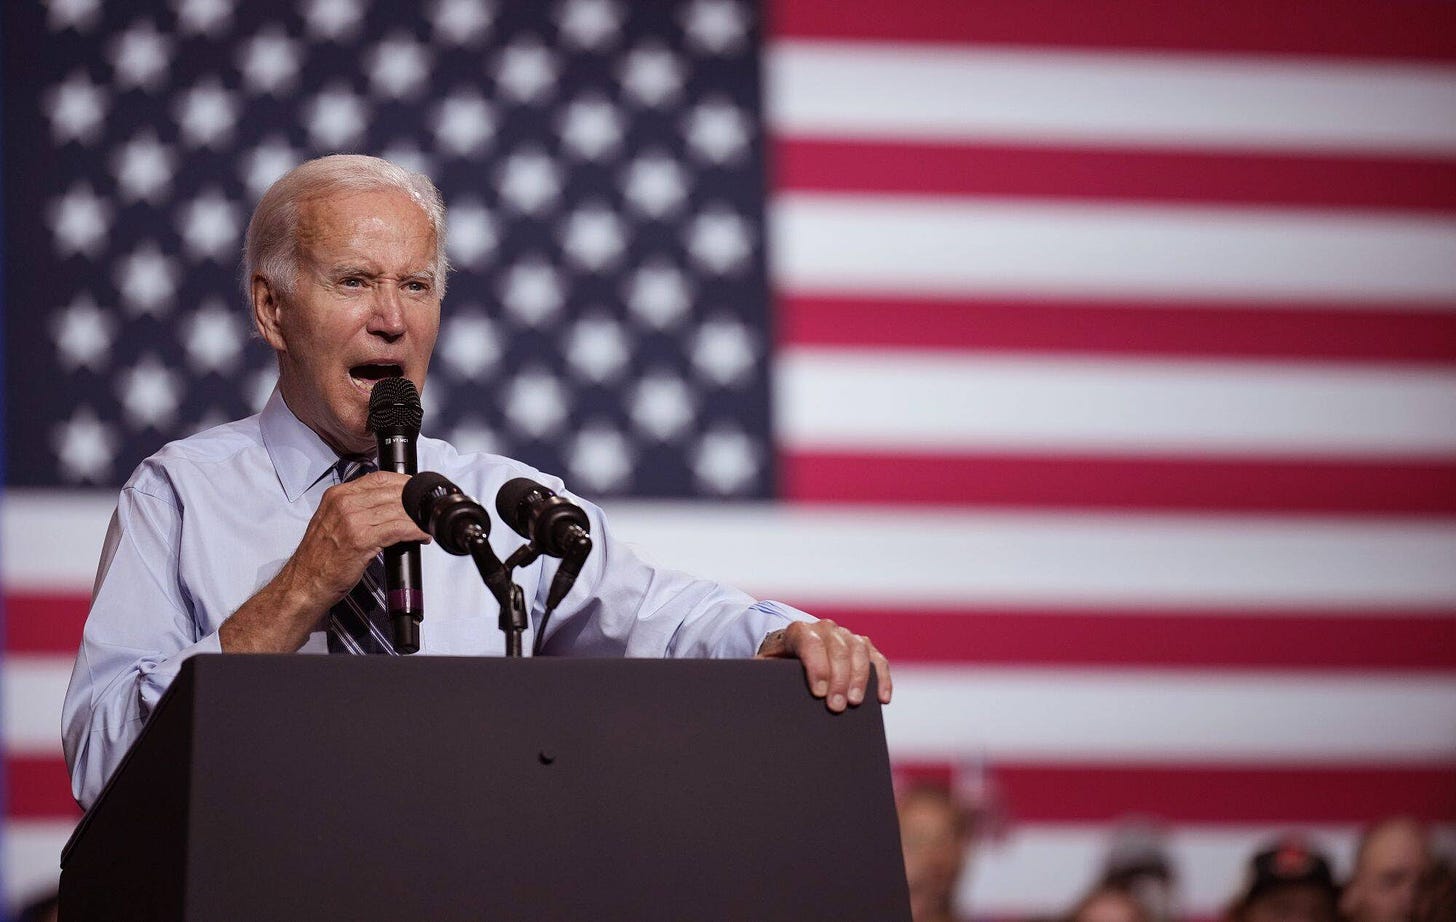 President Biden speaks during a rally hosted by the Democratic National Committee at Richard Montgomery High School on Aug. 25 in Rockville, Md. (Drew Angerer/Getty Images)